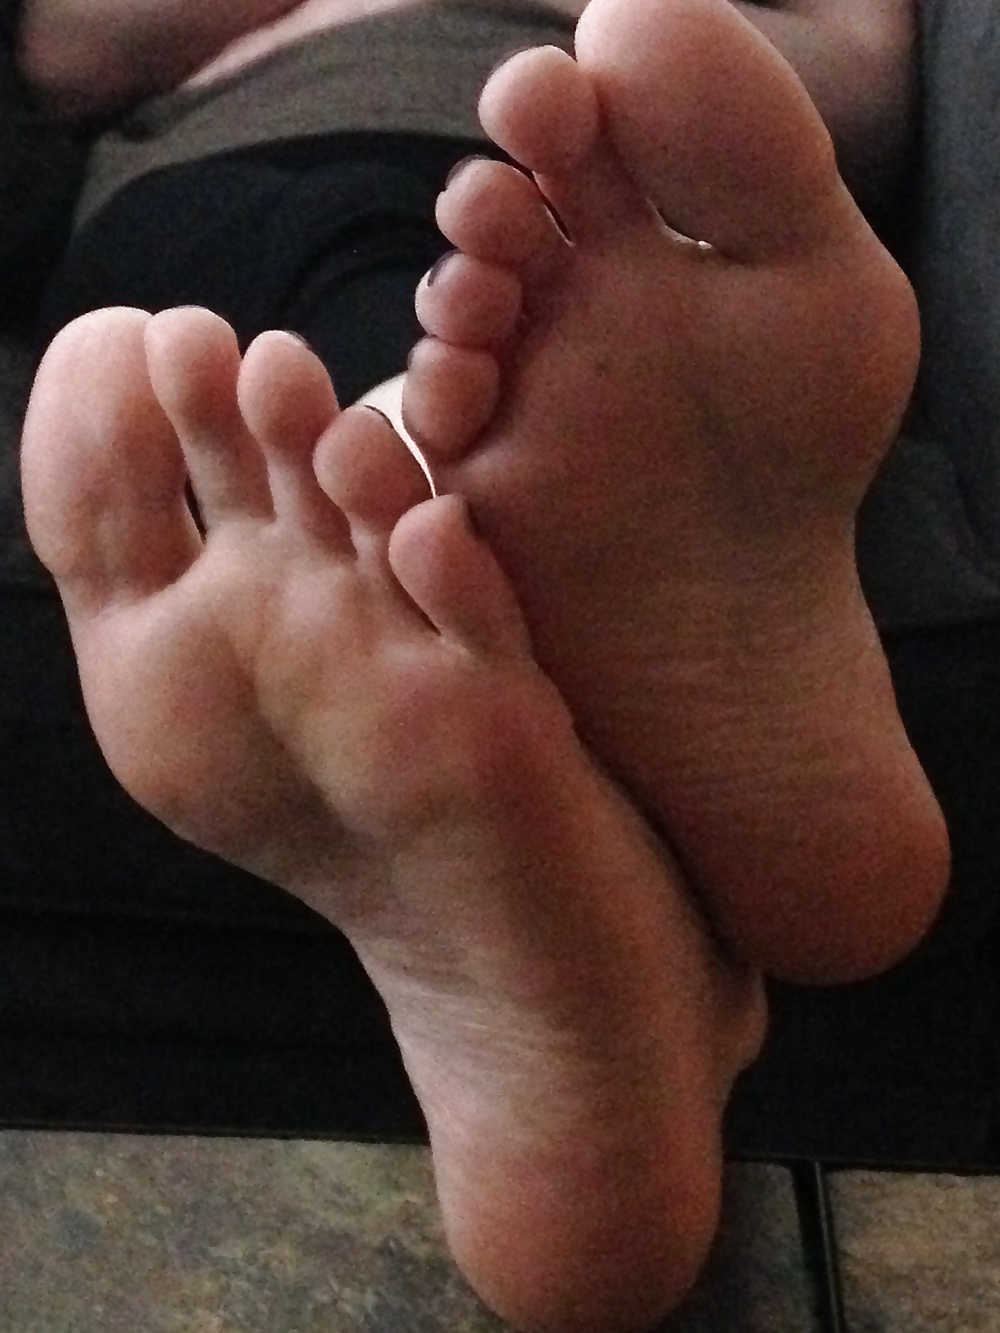 More Wife's Feet and Socks #38874396